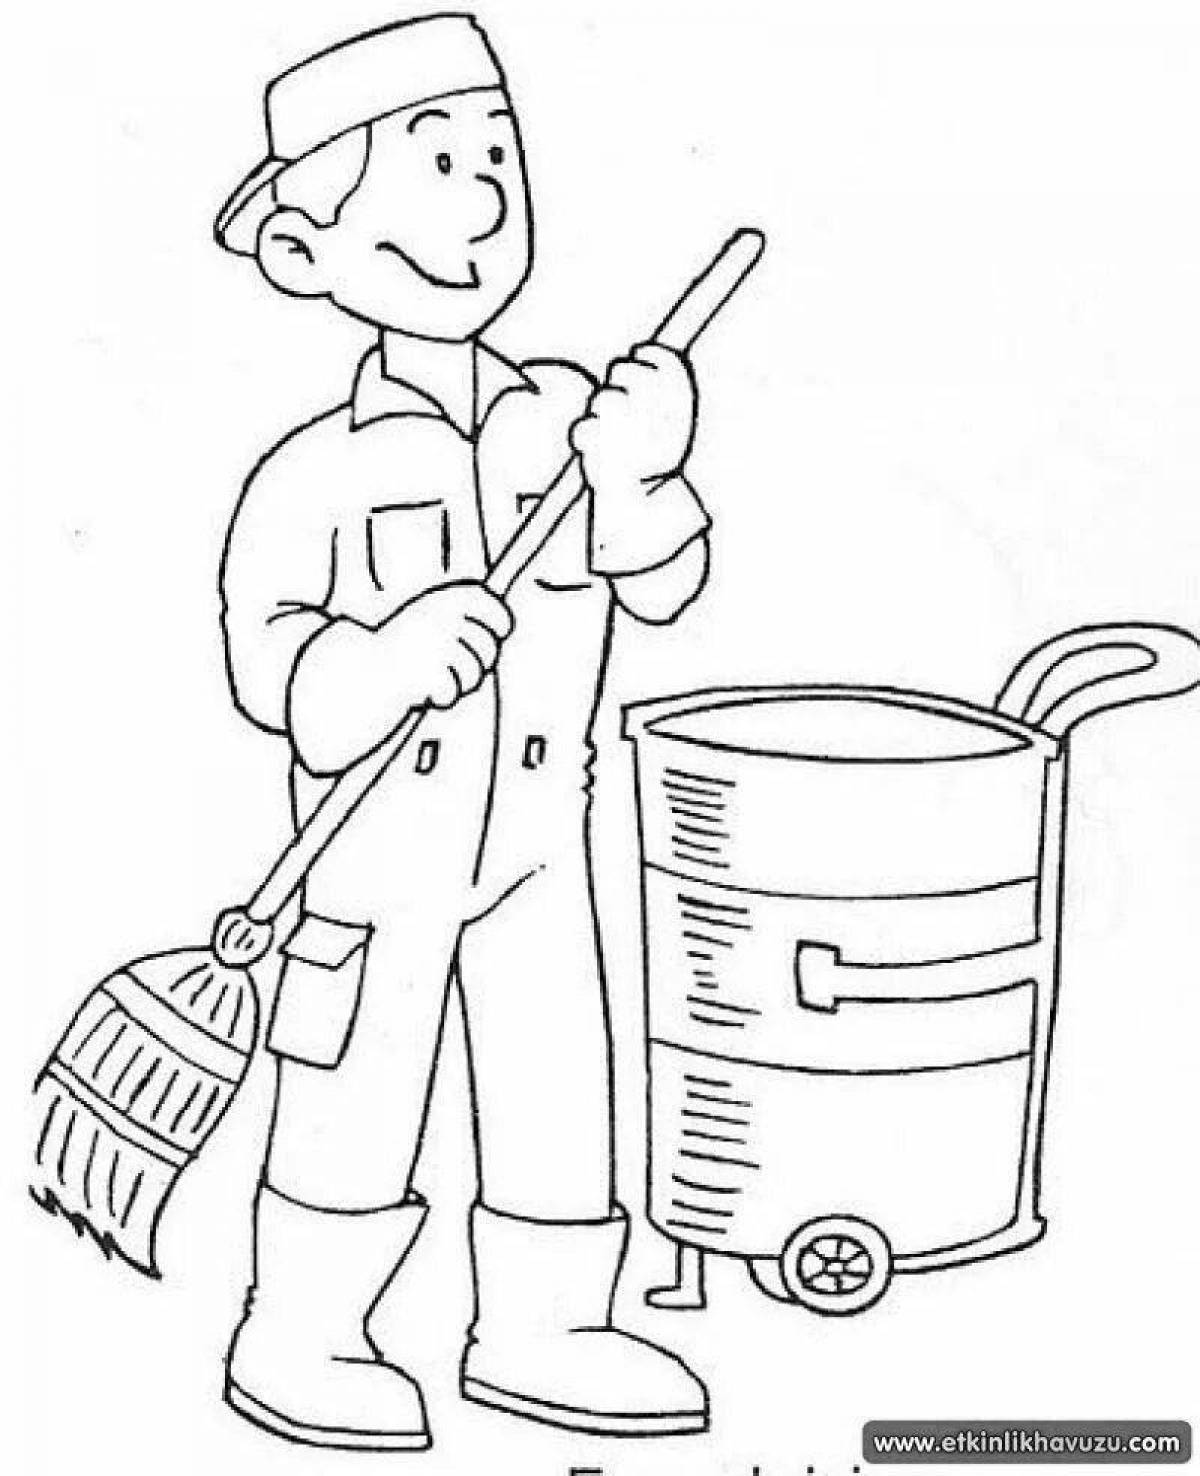 Playful plumber coloring page